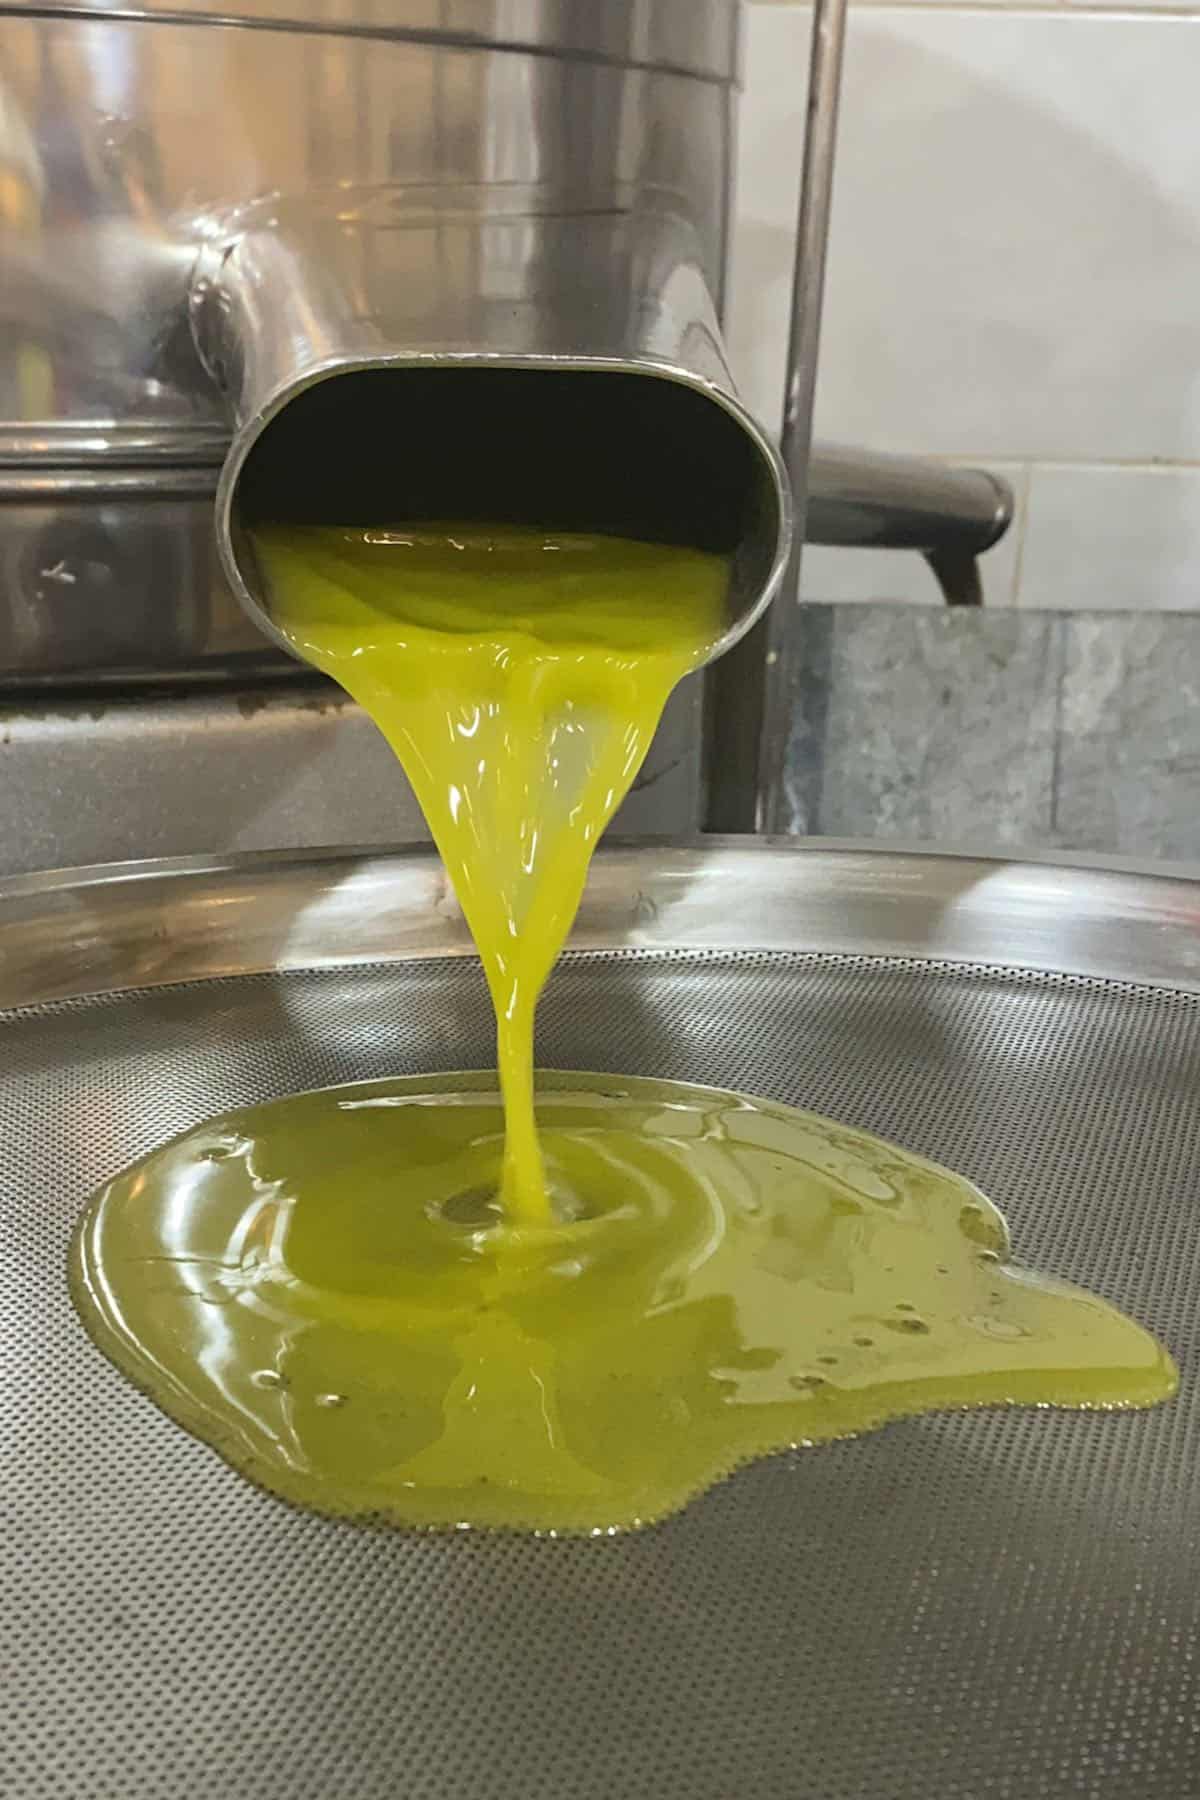 How is Olive Oil Made?